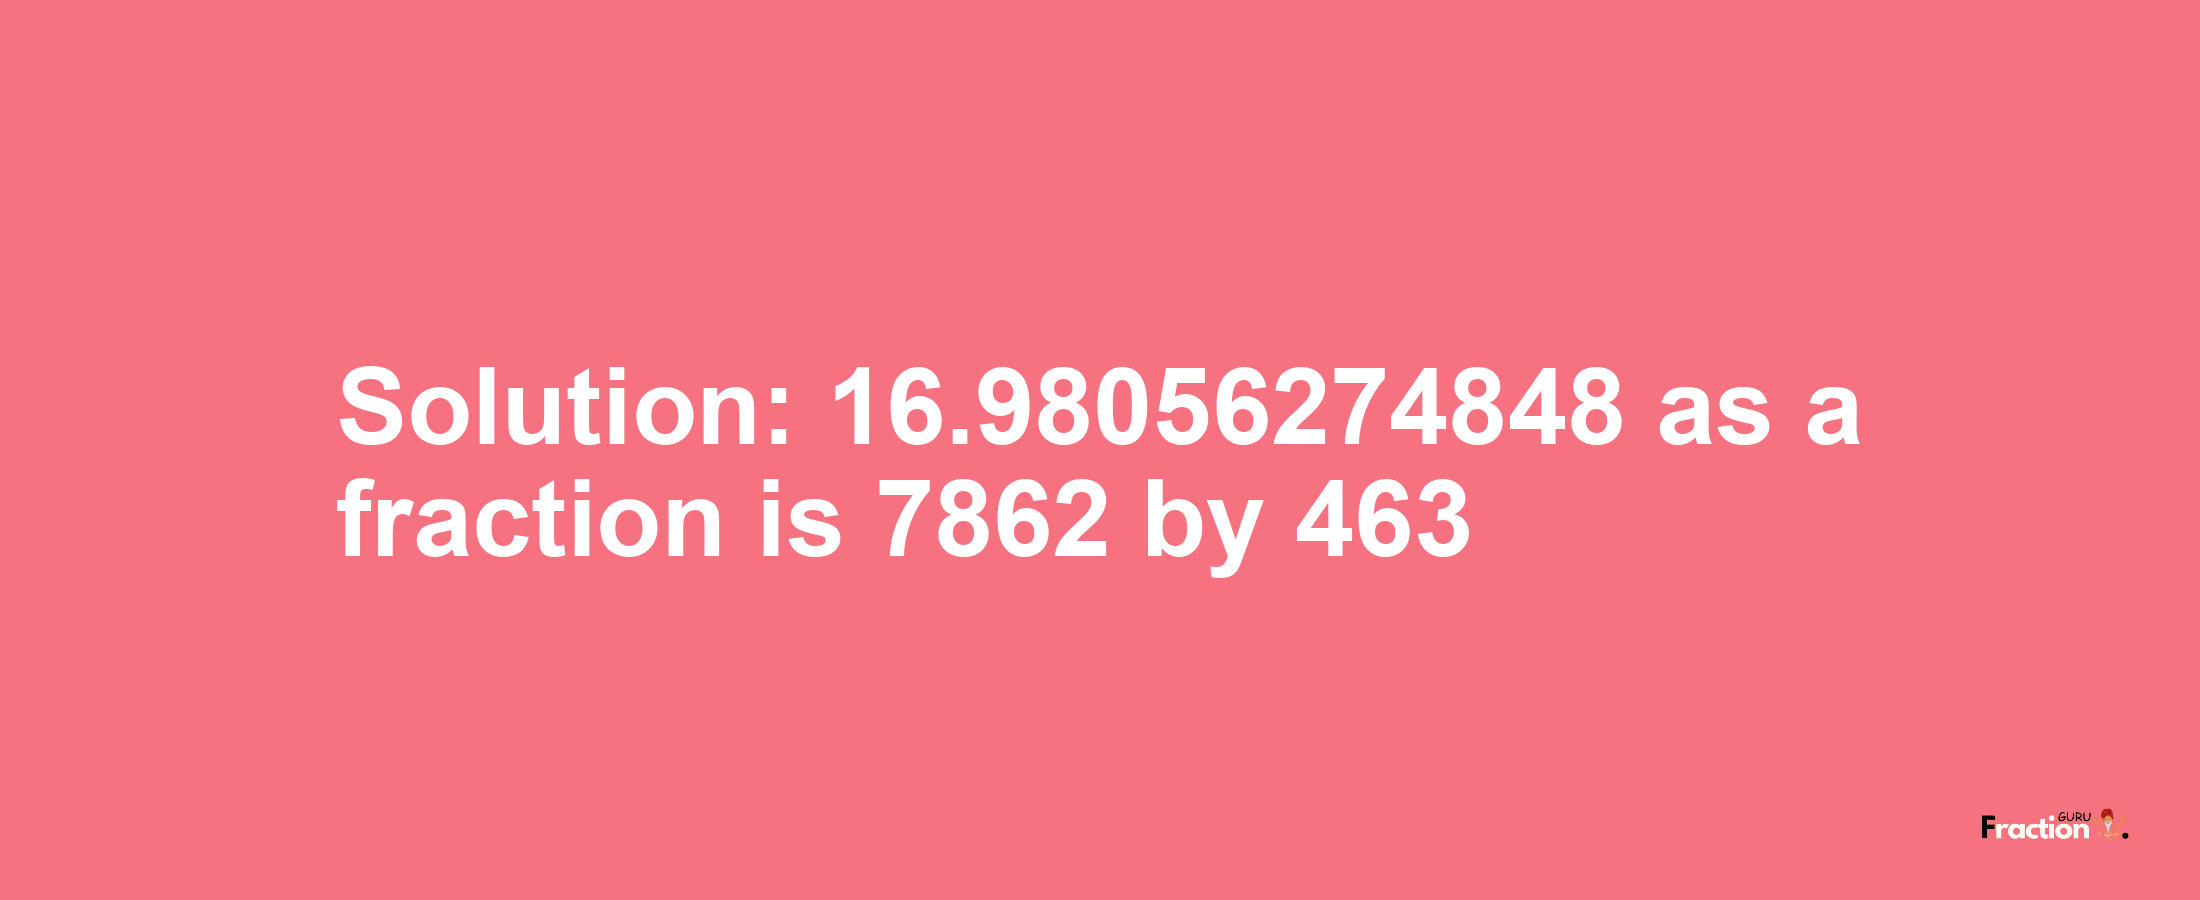 Solution:16.98056274848 as a fraction is 7862/463